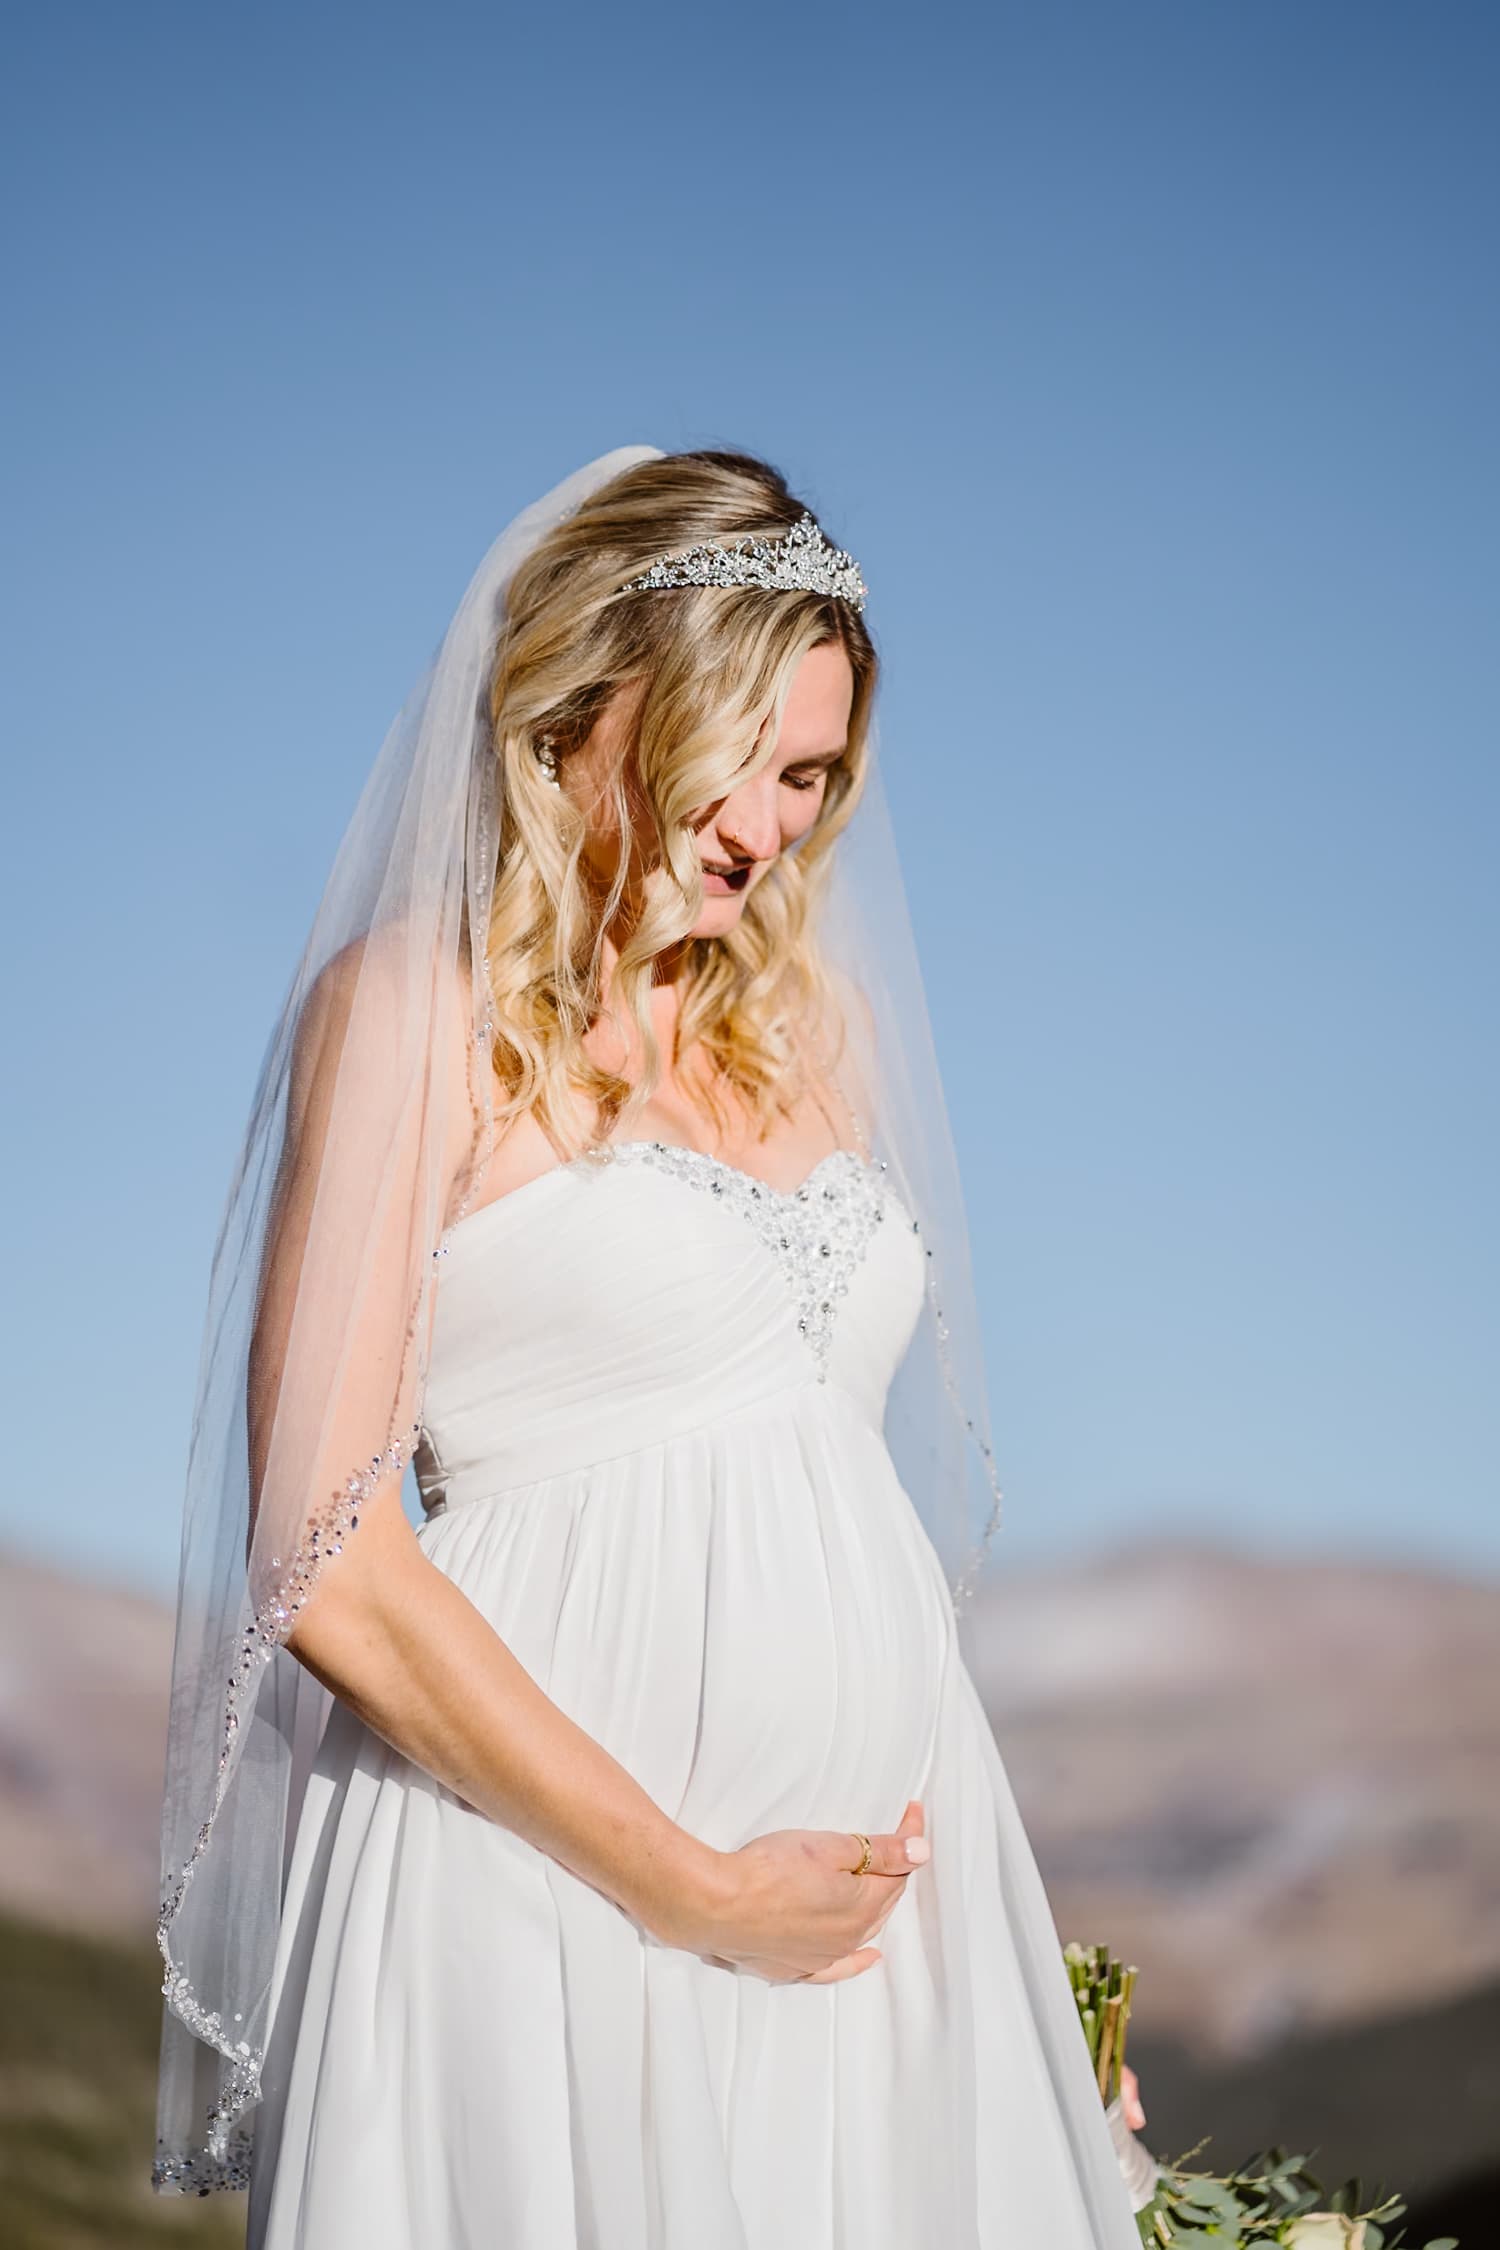 A bride showing off her baby bump on her elopement.